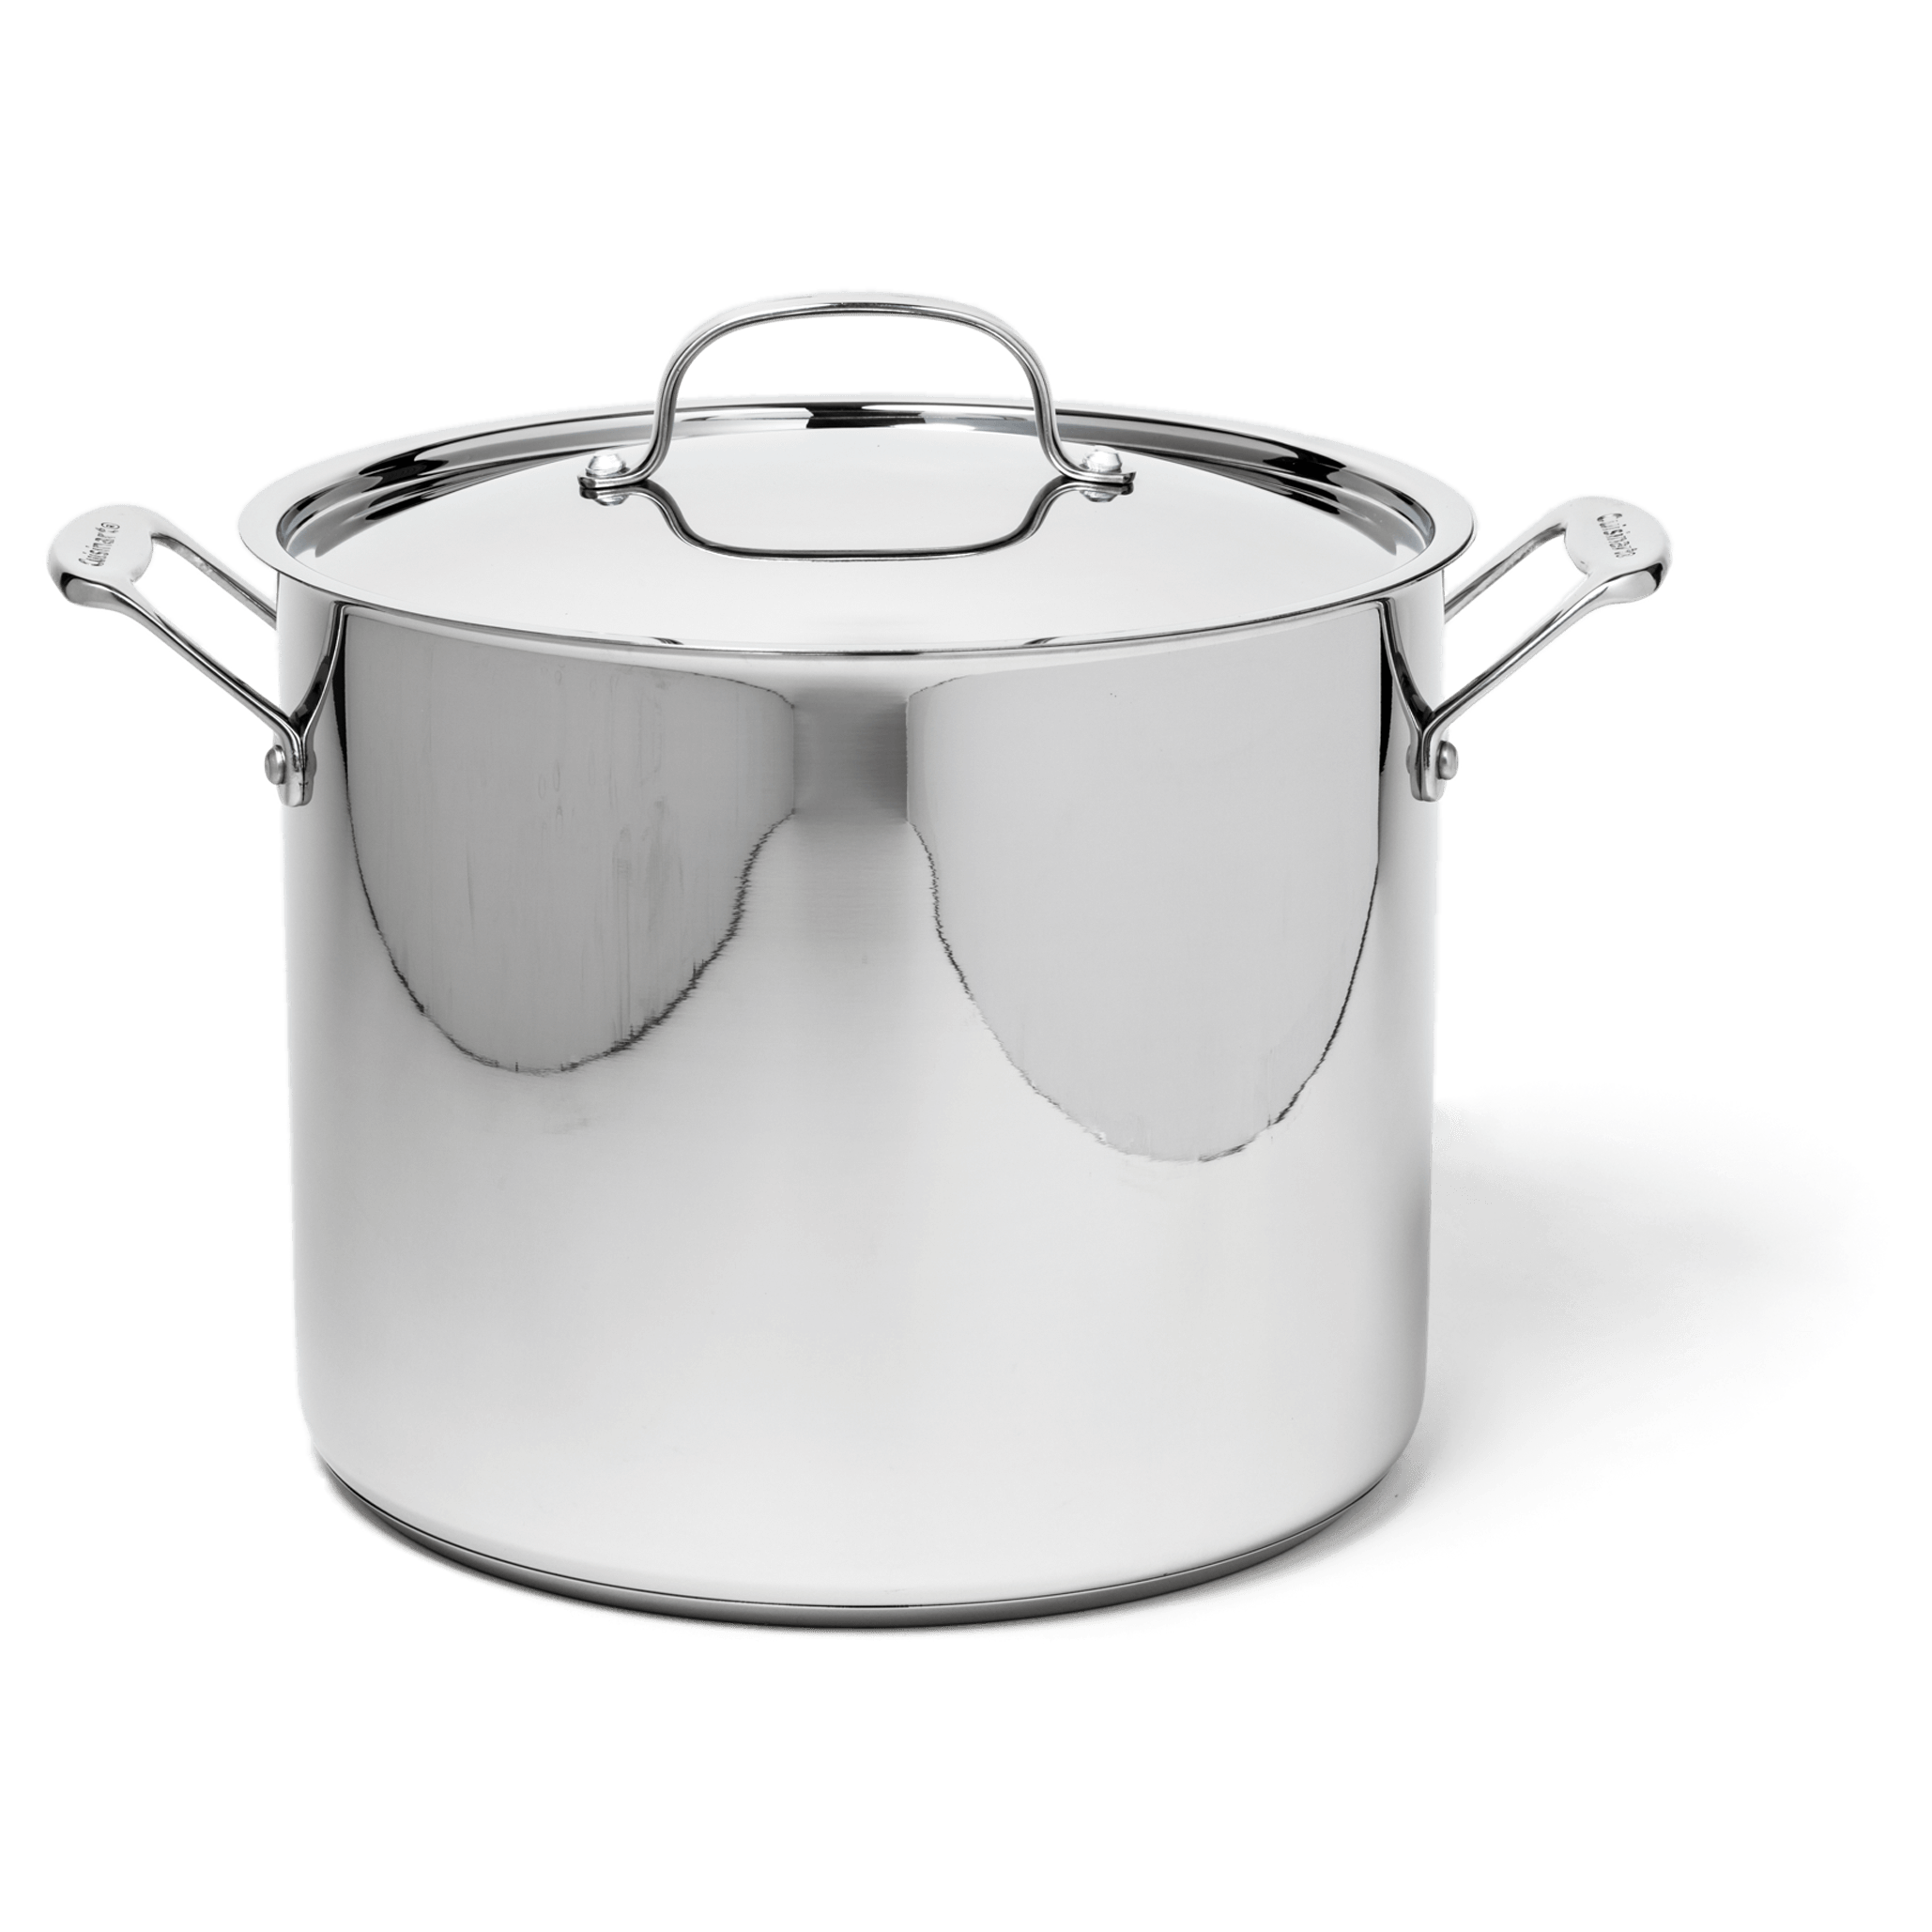 Cuisinart Chef&s Classic Stainless Stockpot with Cover 10 Quart